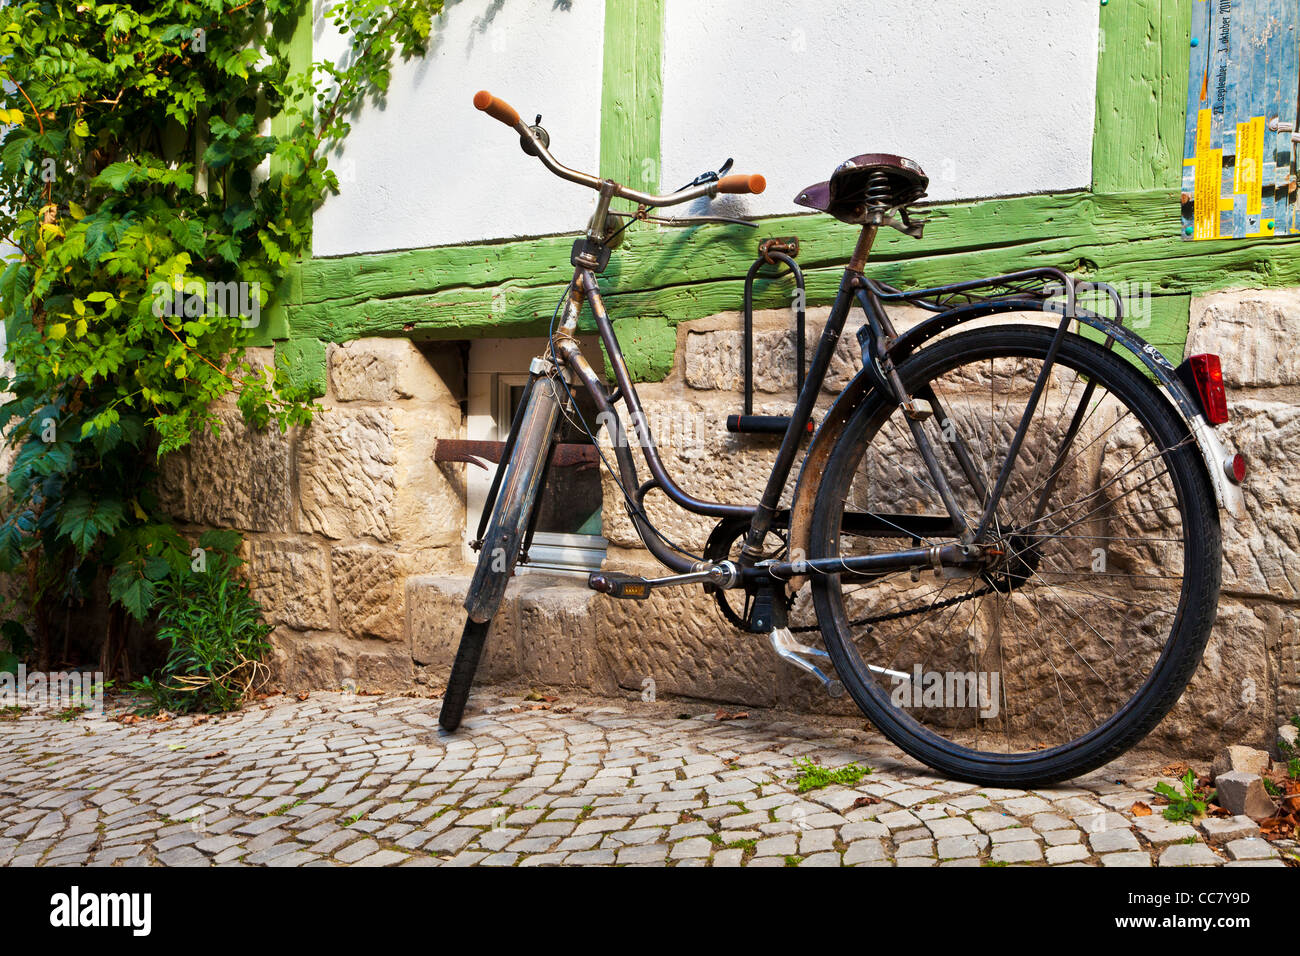 Rusty old bike in a cobbled street of half-timbered medieval houses in the UNESCO World Heritage town of Quedlinburg, Germany. Stock Photo